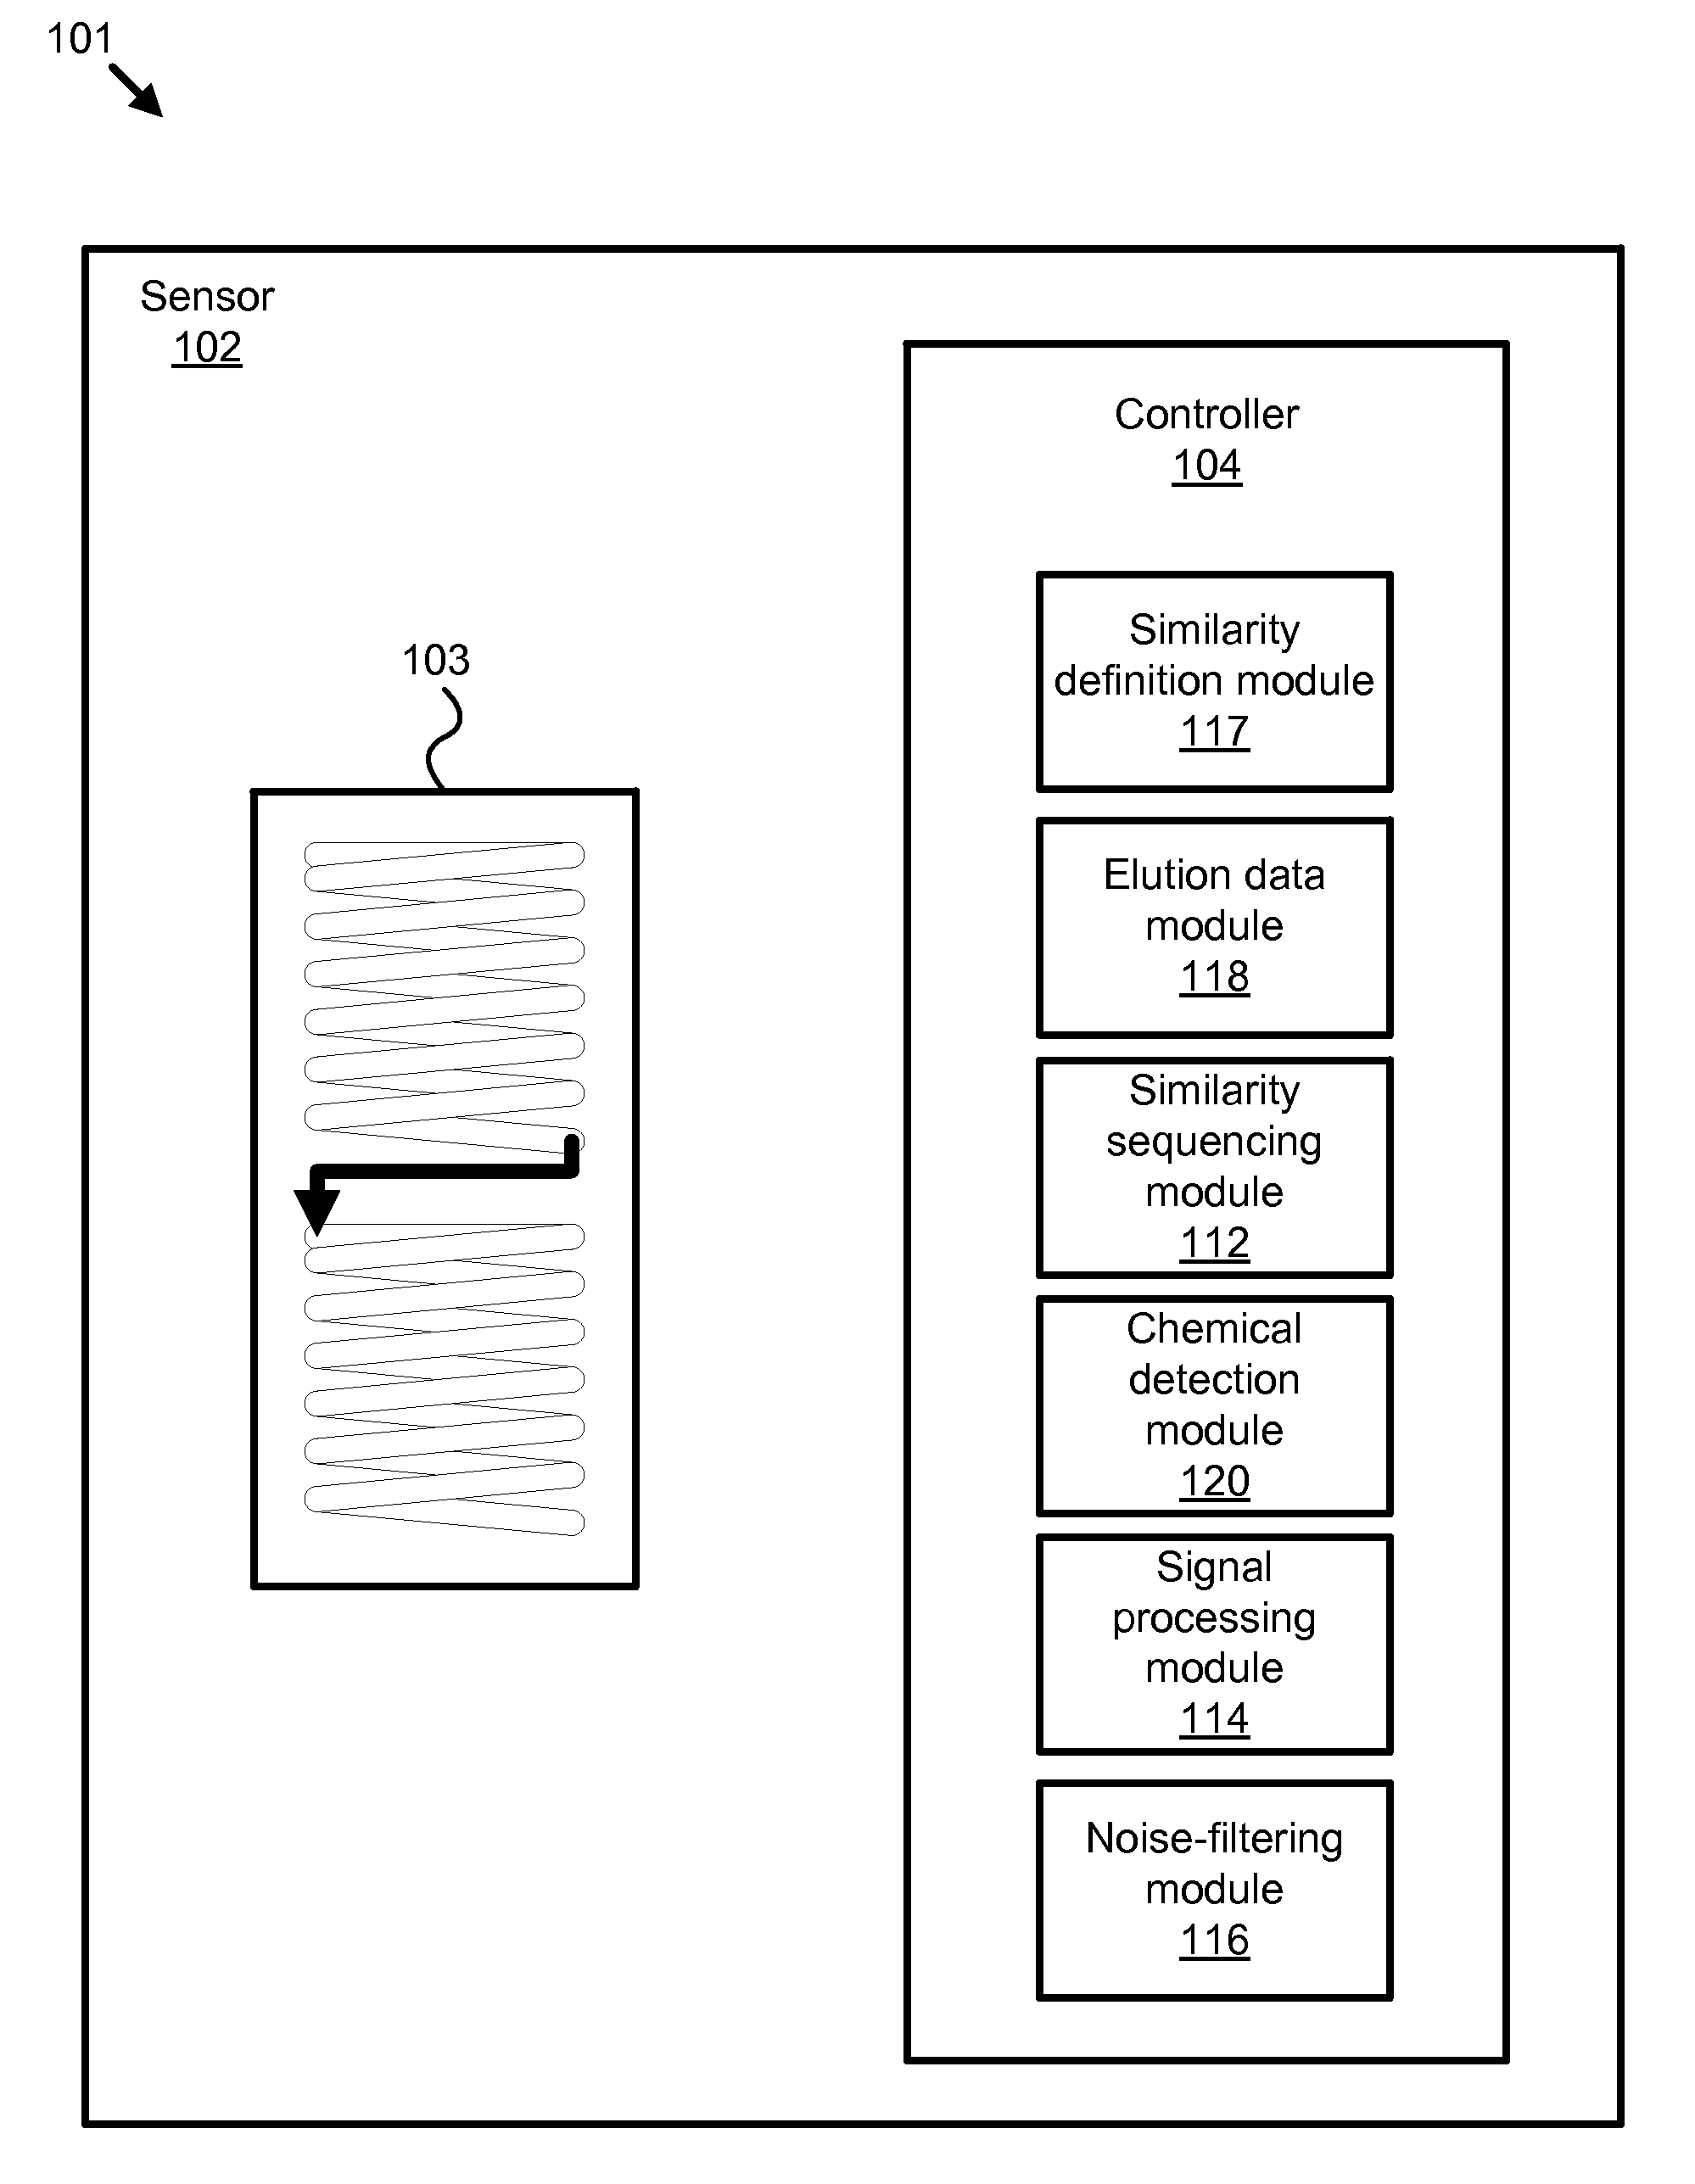 Apparatus, system, and method for broad spectrum chemical detection